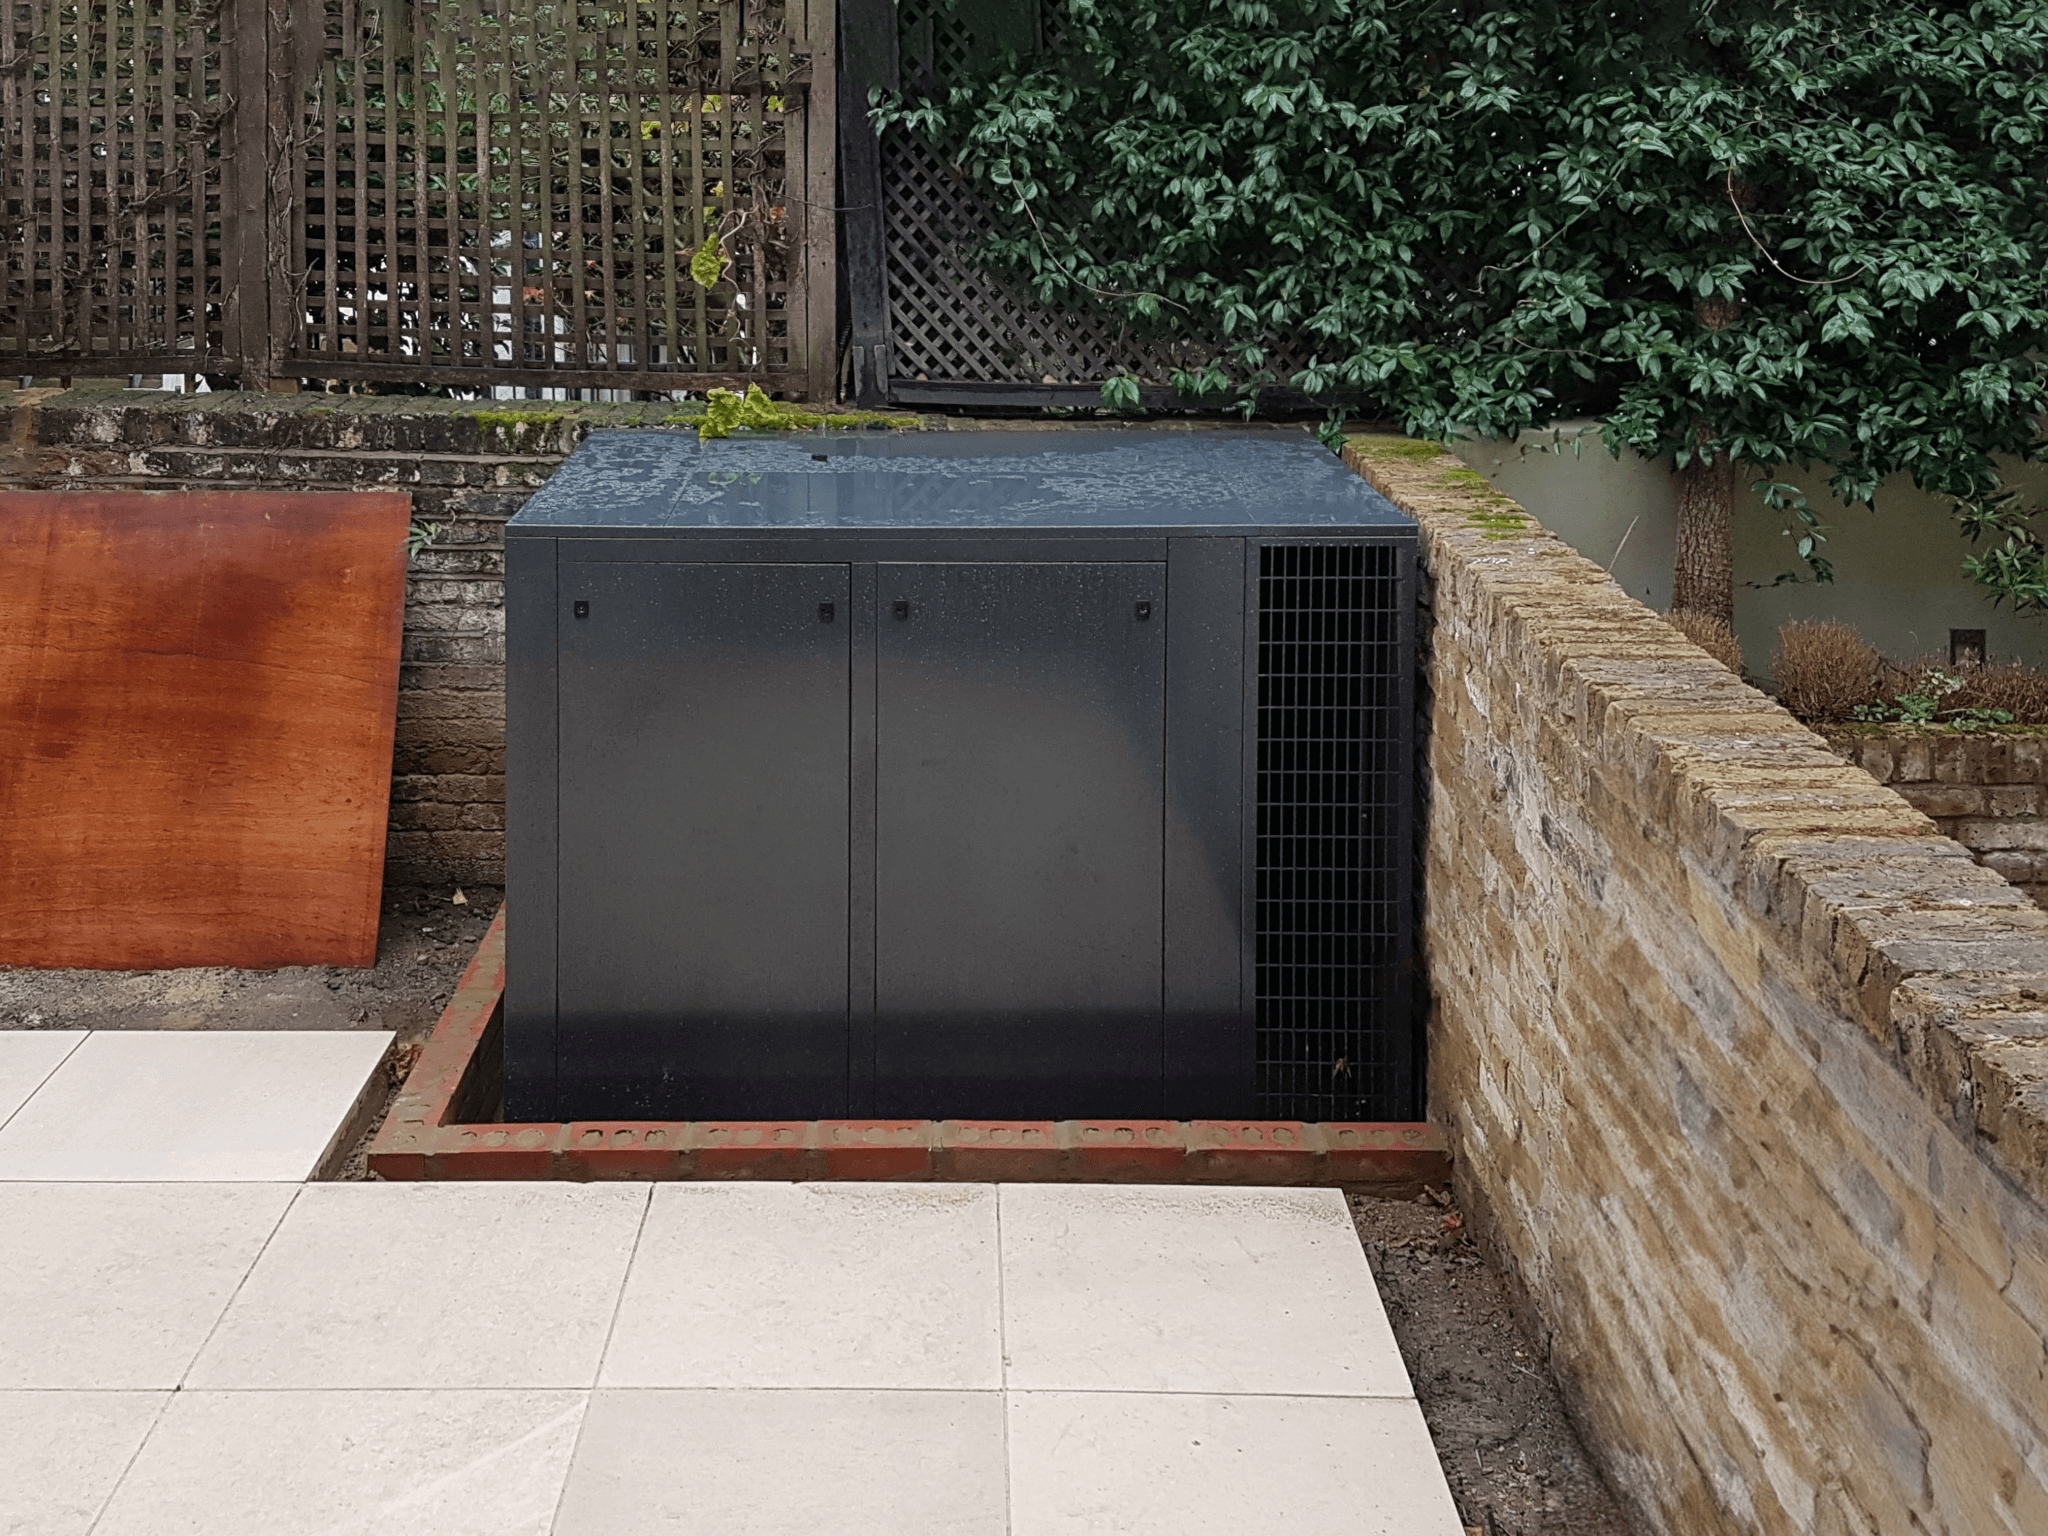 External acoustic enclosures for silent air conditioning concealed in the garden in a London conservation area